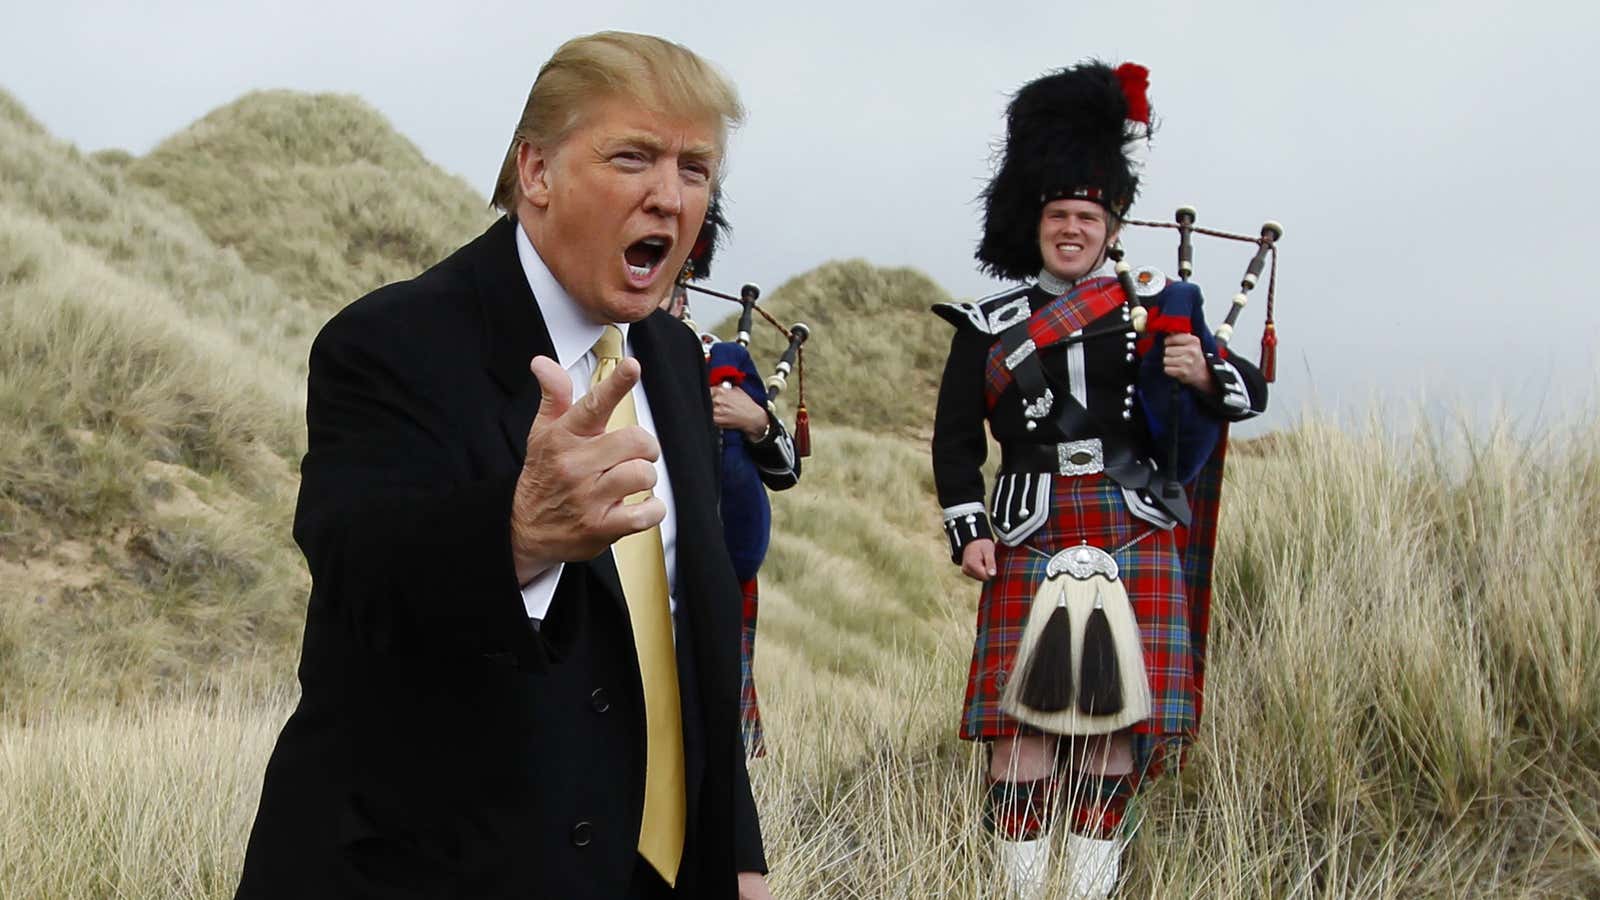 No more bagpipes for you.